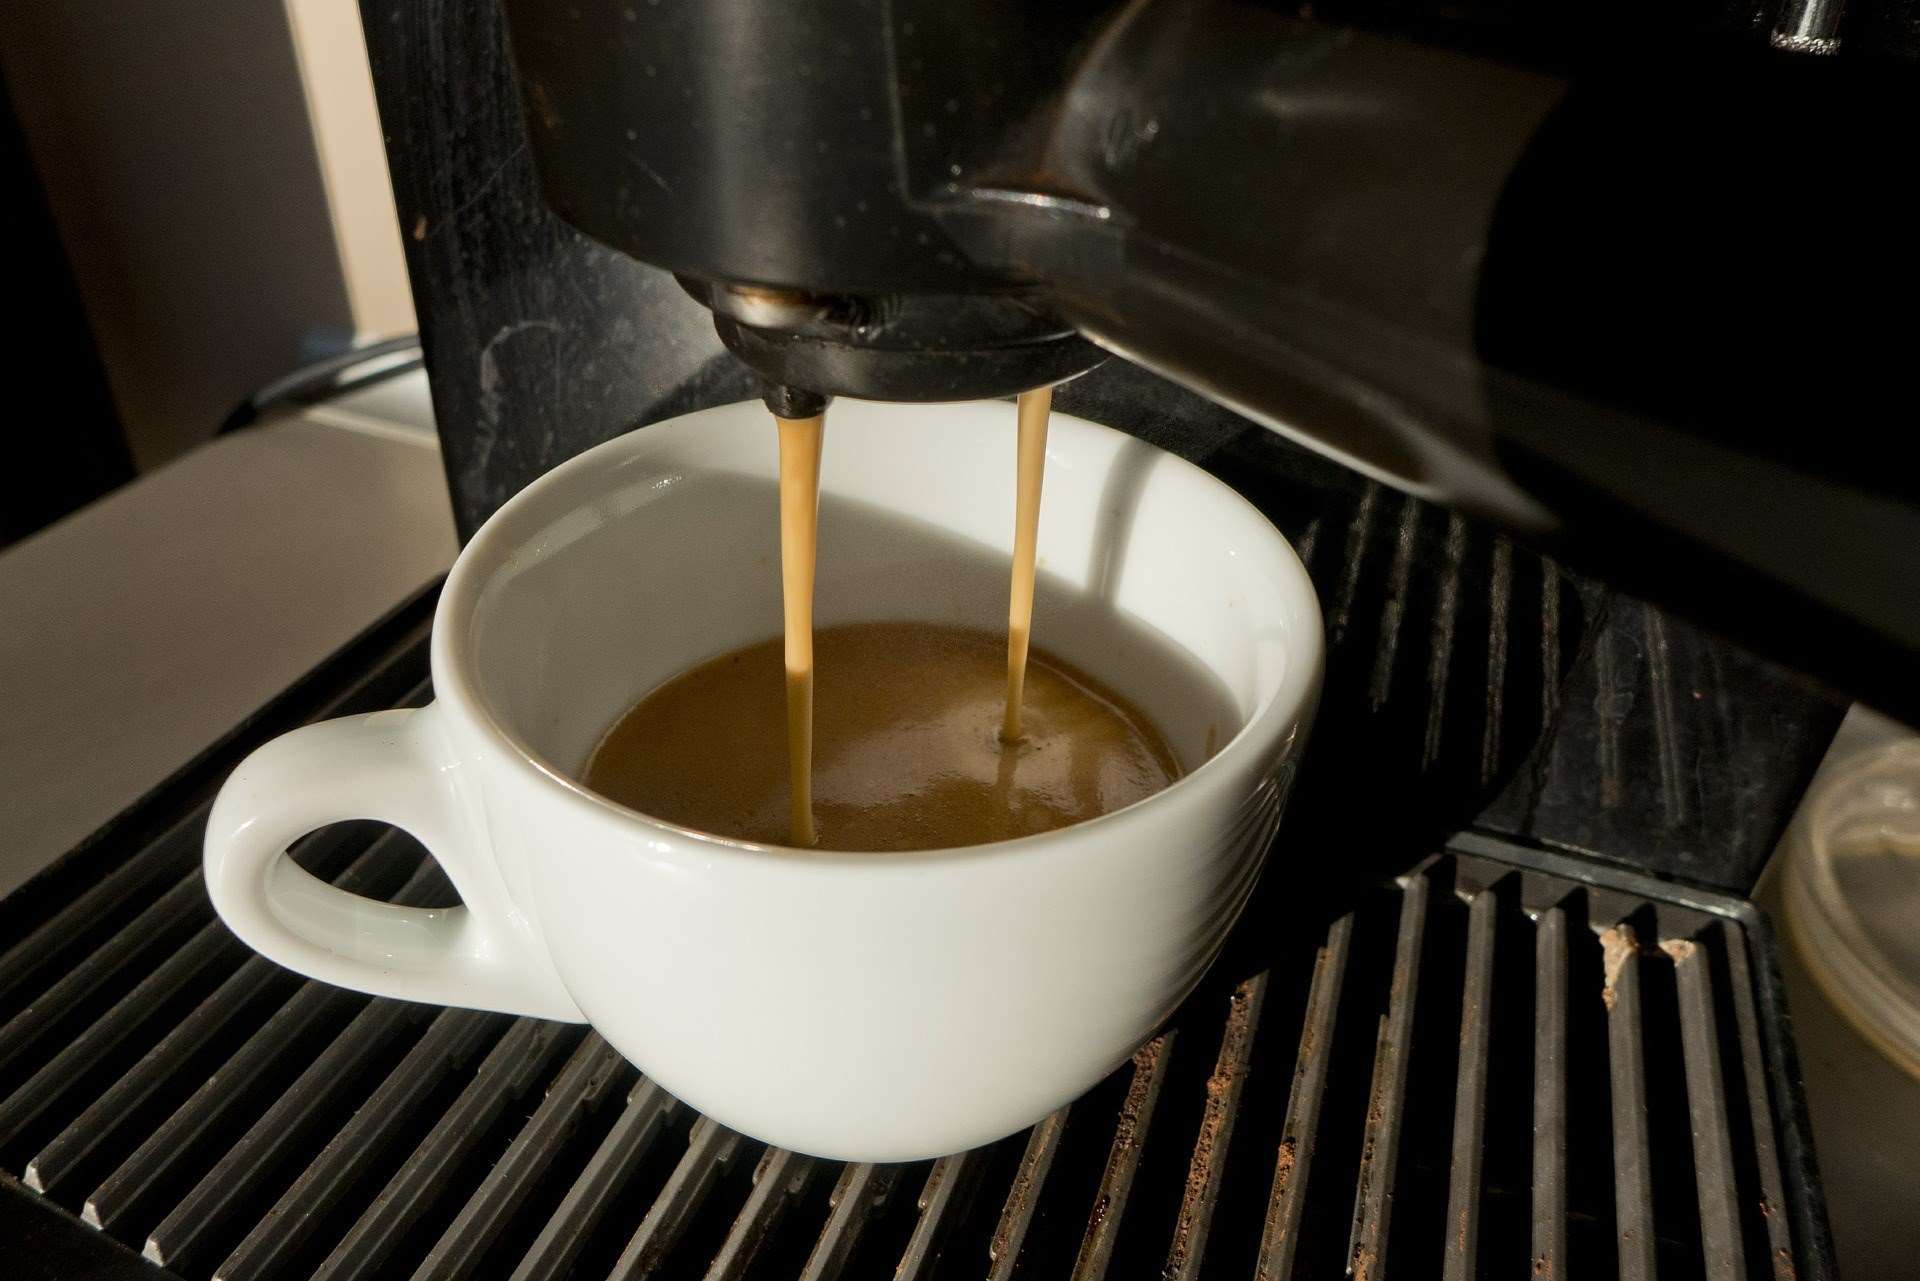 Coffee poured from an office machine. Stock picture